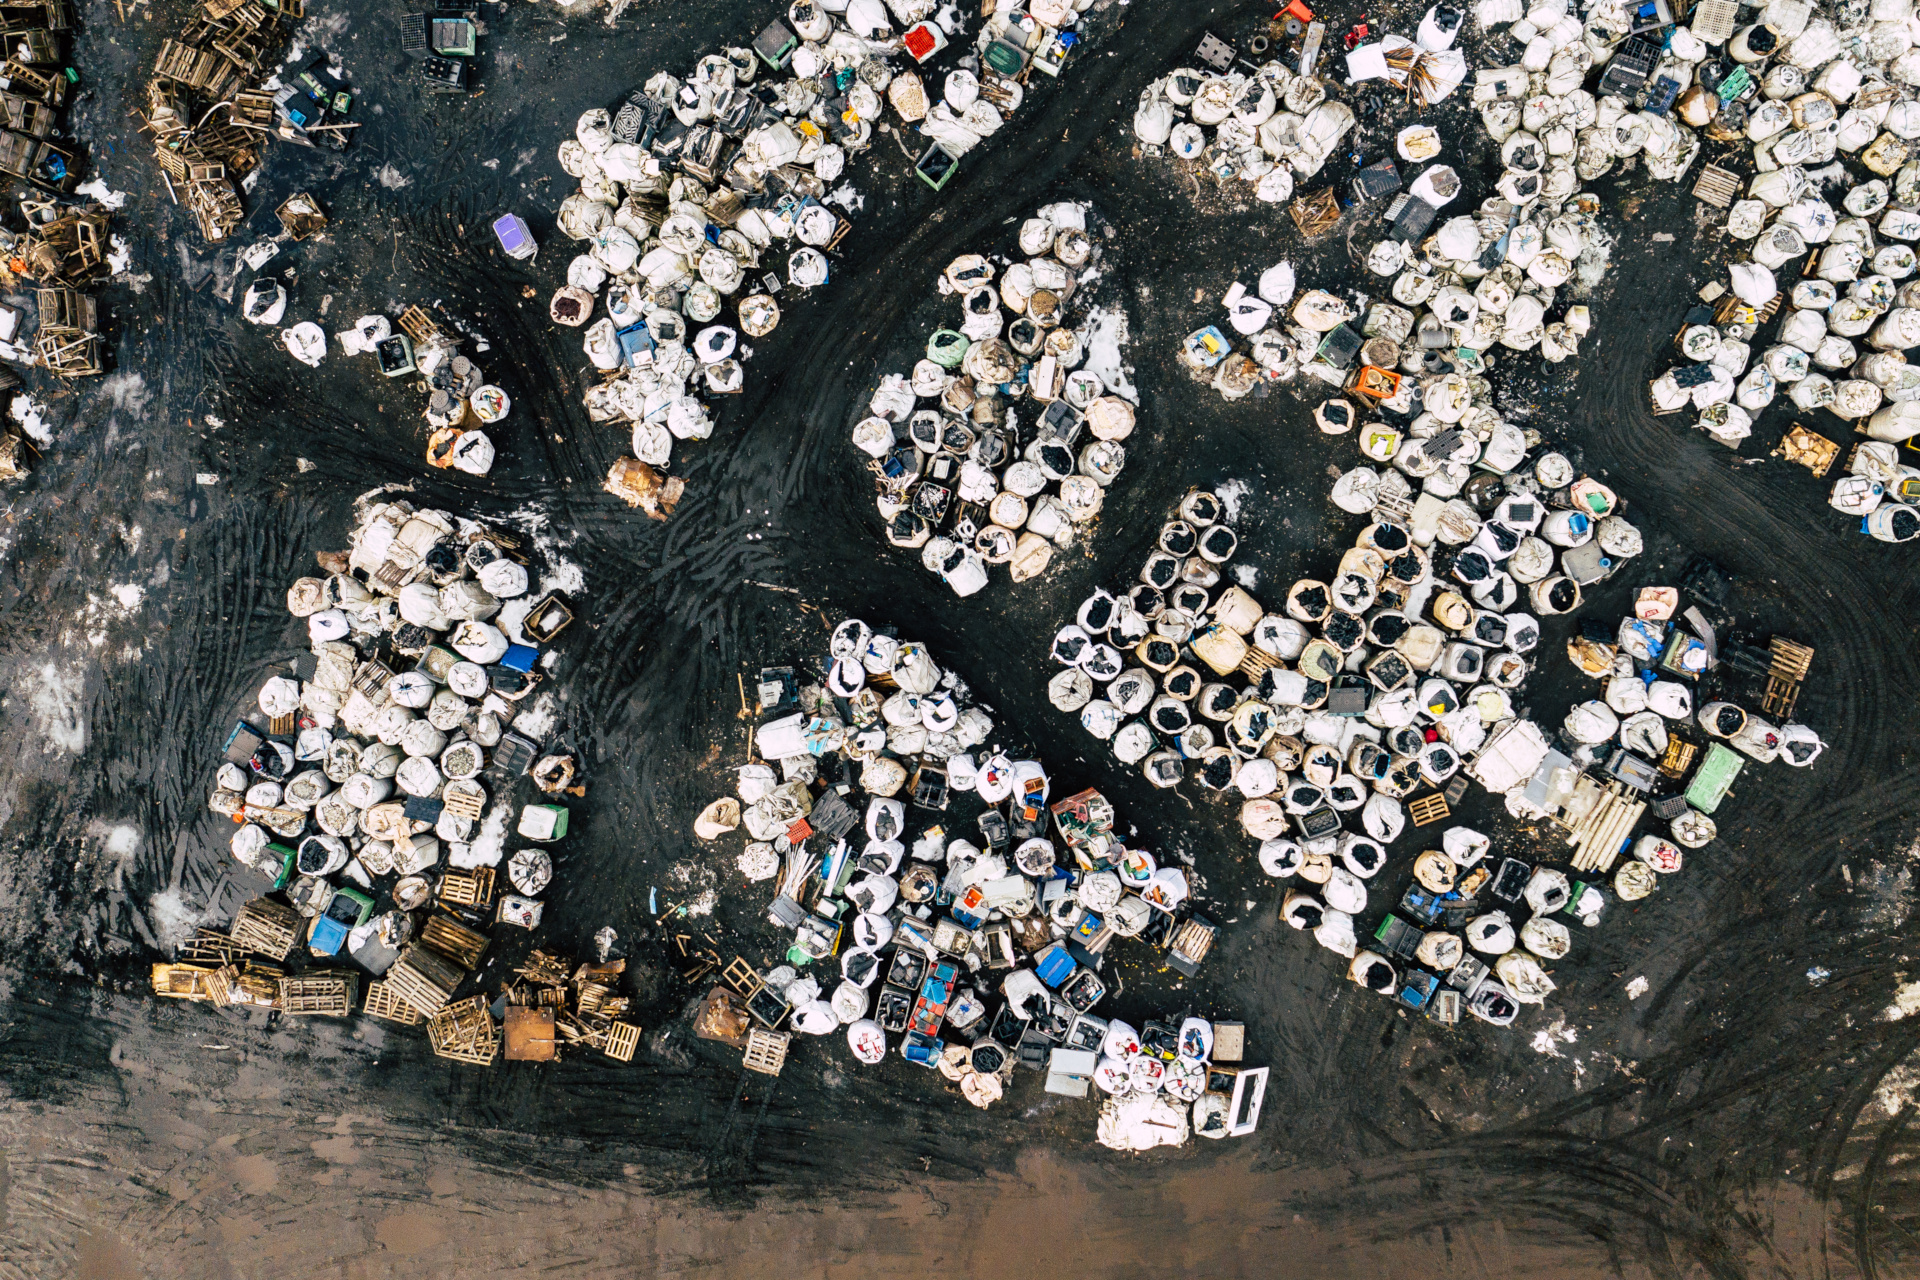 Overhead view of landfill